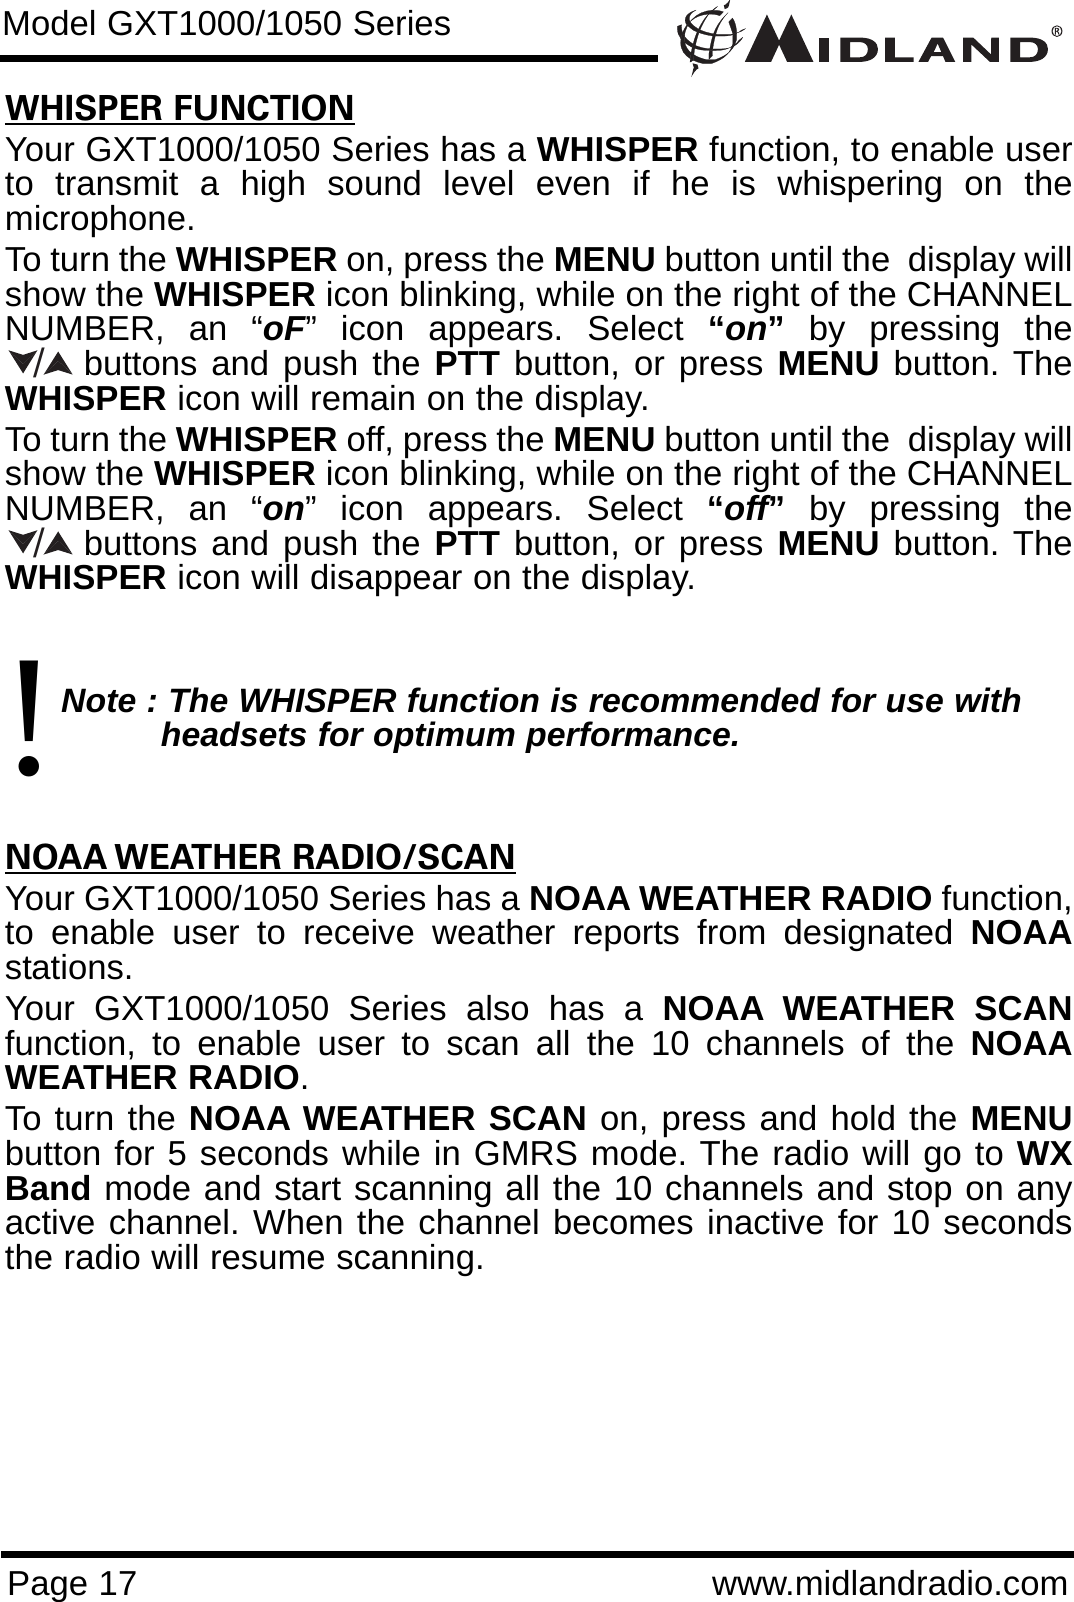 Page 17 www.midlandradio.comWHISPER FUNCTIONYour GXT1000/1050 Series has a WHISPER function, to enable userto transmit a high sound level even if he is whispering on themicrophone. To turn the WHISPER on, press the MENU button until the  display willshow the WHISPER icon blinking, while on the right of the CHANNELNUMBER, an “oF” icon appears. Select “on”by pressing thebuttons and push the PTT button, or press MENU button. TheWHISPER icon will remain on the display.To turn the WHISPER off, press the MENU button until the  display willshow the WHISPER icon blinking, while on the right of the CHANNELNUMBER, an “on” icon appears. Select “off”by pressing thebuttons and push the PTT button, or press MENU button. TheWHISPER icon will disappear on the display.Note : The WHISPER function is recommended for use with headsets for optimum performance.NOAA WEATHER RADIO/SCANYour GXT1000/1050 Series has a NOAA WEATHER RADIO function,to enable user to receive weather reports from designated NOAAstations. Your GXT1000/1050 Series also has a NOAA WEATHER SCANfunction, to enable user to scan all the 10 channels of the NOAAWEATHER RADIO. To turn the NOAA WEATHER SCAN on, press and hold the MENUbutton for 5 seconds while in GMRS mode. The radio will go to WXBand mode and start scanning all the 10 channels and stop on anyactive channel. When the channel becomes inactive for 10 secondsthe radio will resume scanning.Model GXT1000/1050 Series//!